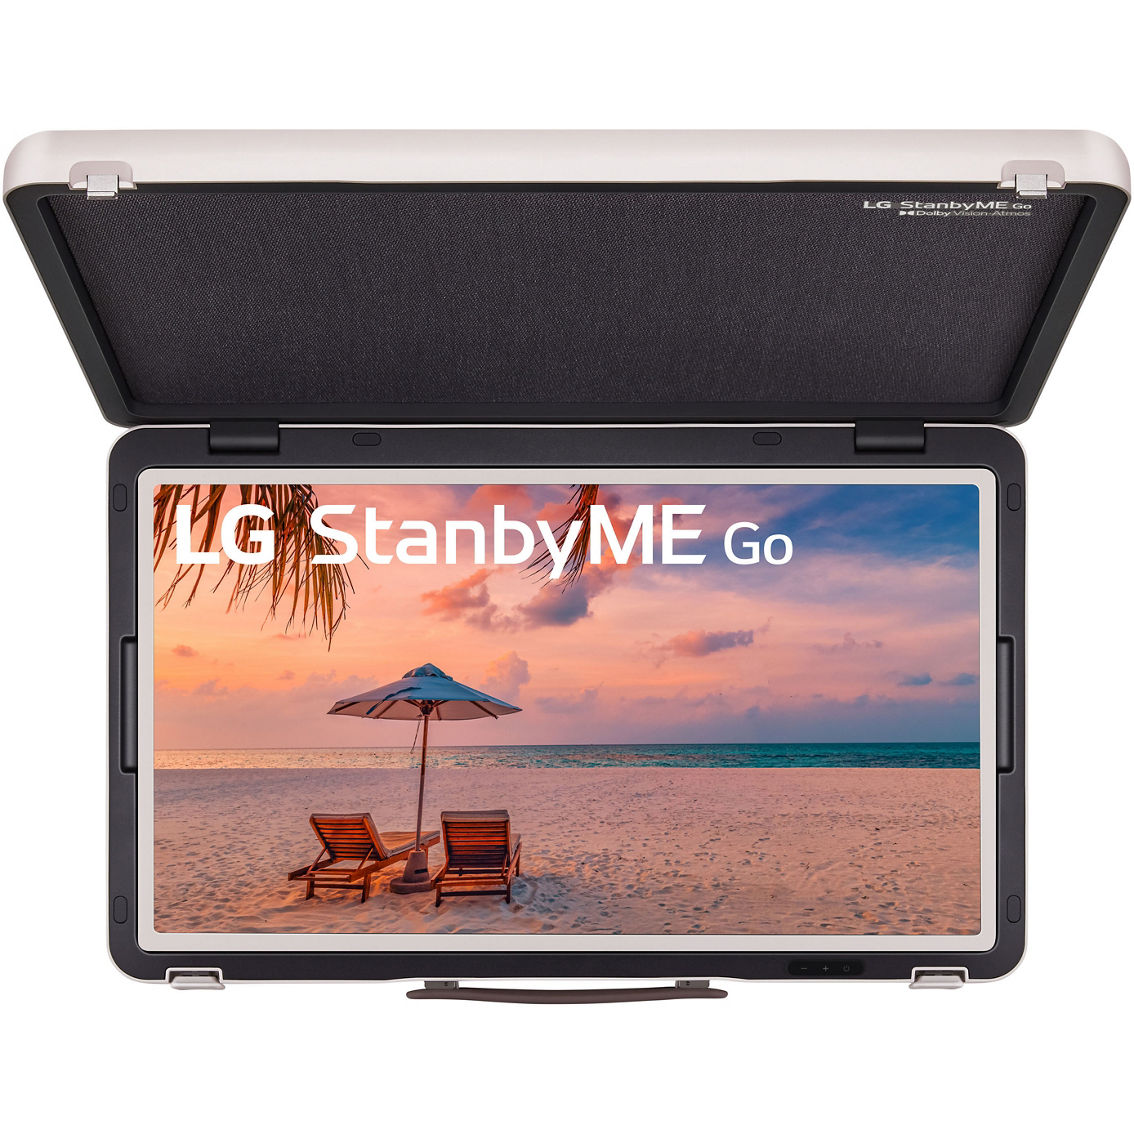 LG 27 in. StanbyME Go Portable Smart LED TV with Briefcase 27LX5QKNA - Image 5 of 10